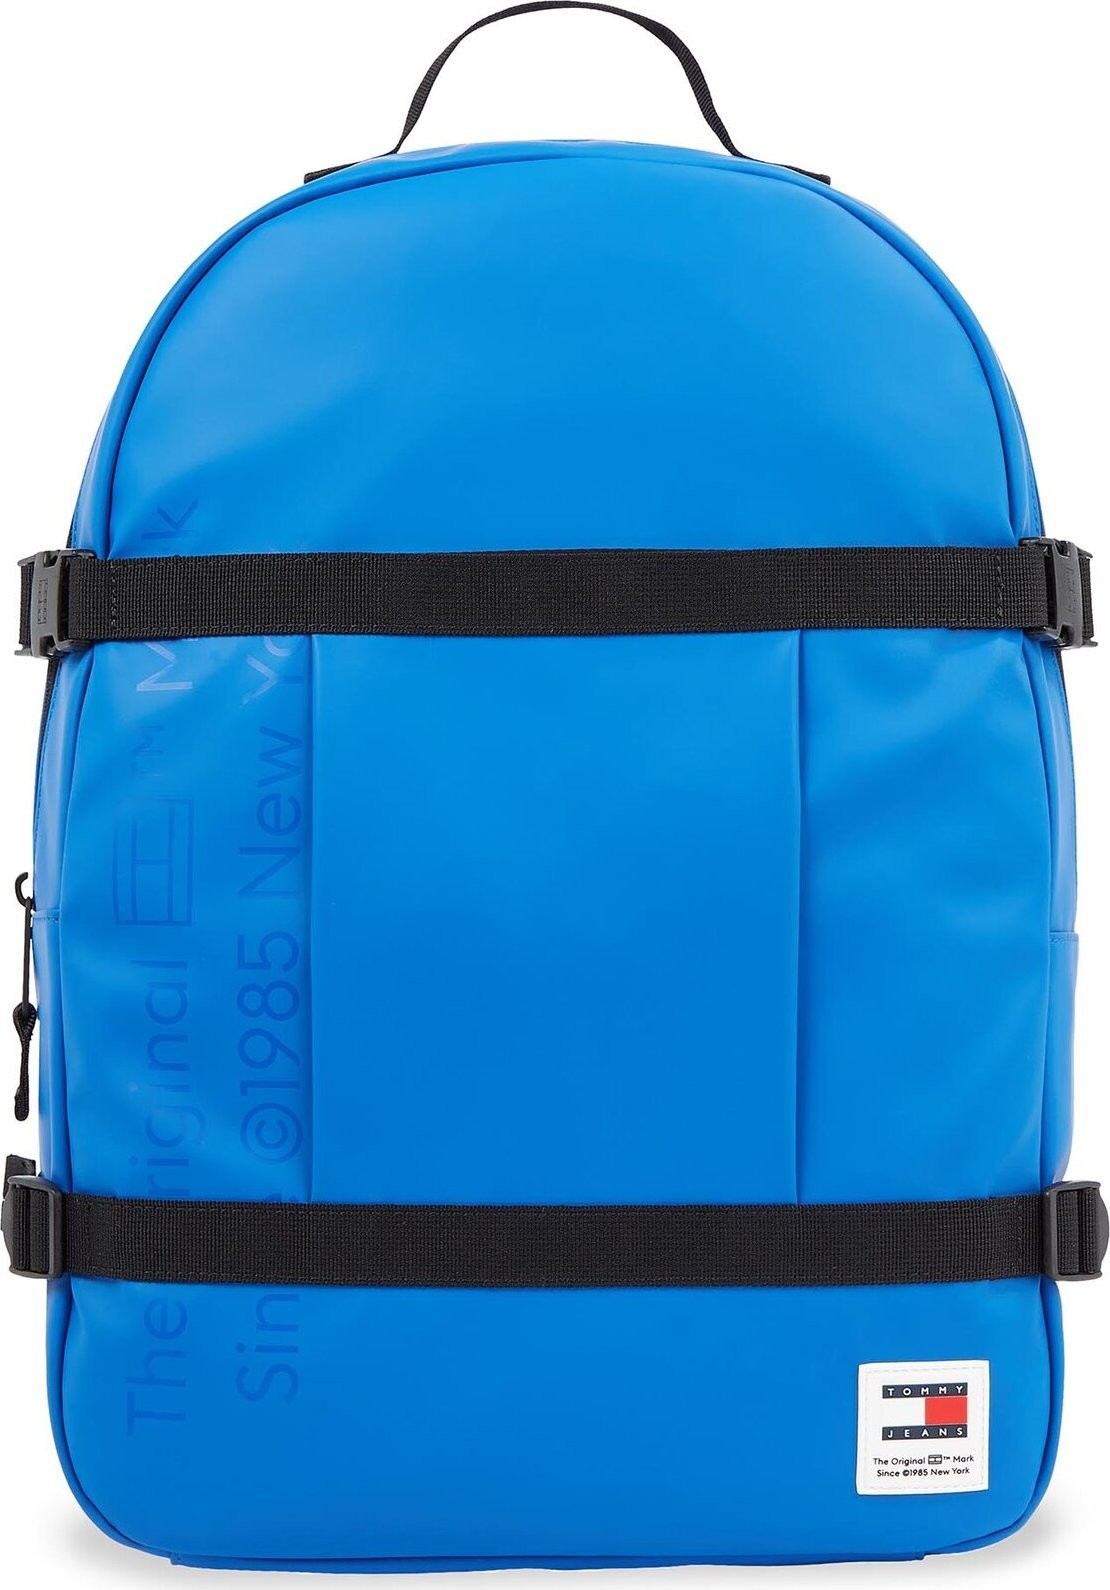 Batoh Tommy Jeans Tjm Daily + Sternum Backpack AM0AM11961 Persian Blue C6P